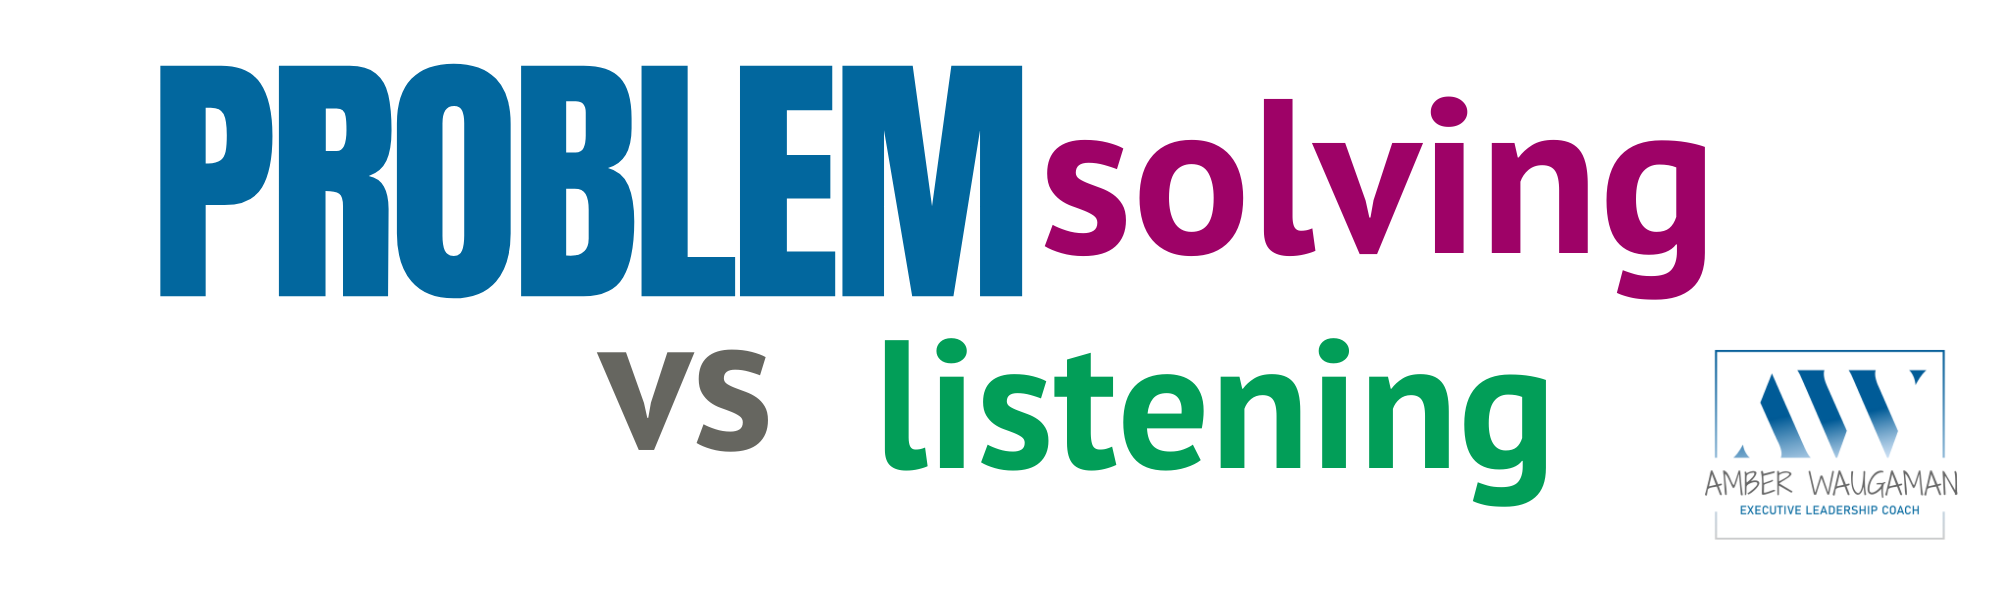 are we problem solving or listening